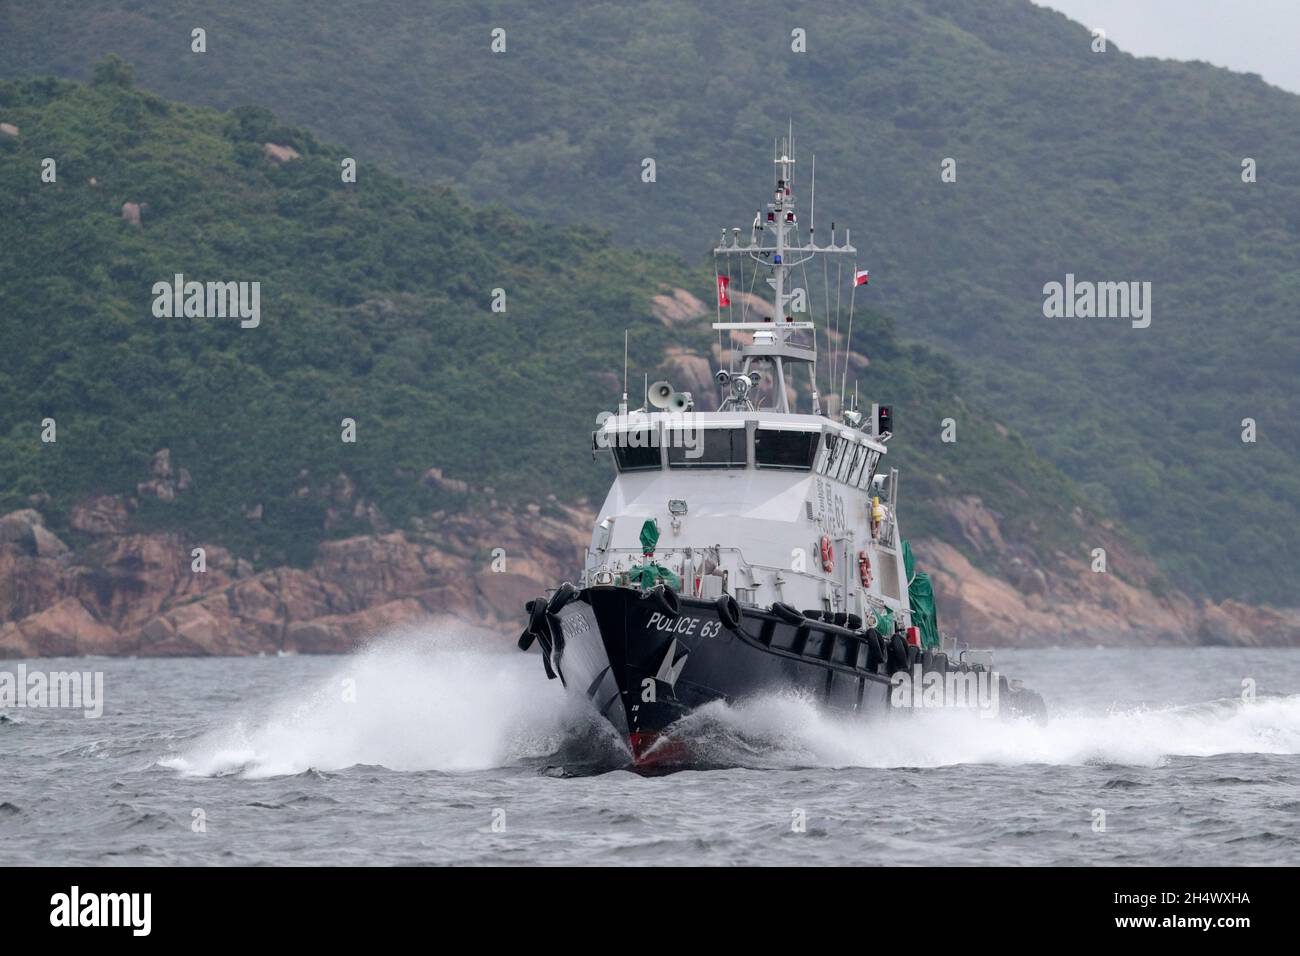 Police Launch 63, - at full speed - south of Aberdeen, Hong Kong 29th August 2021 Stock Photo